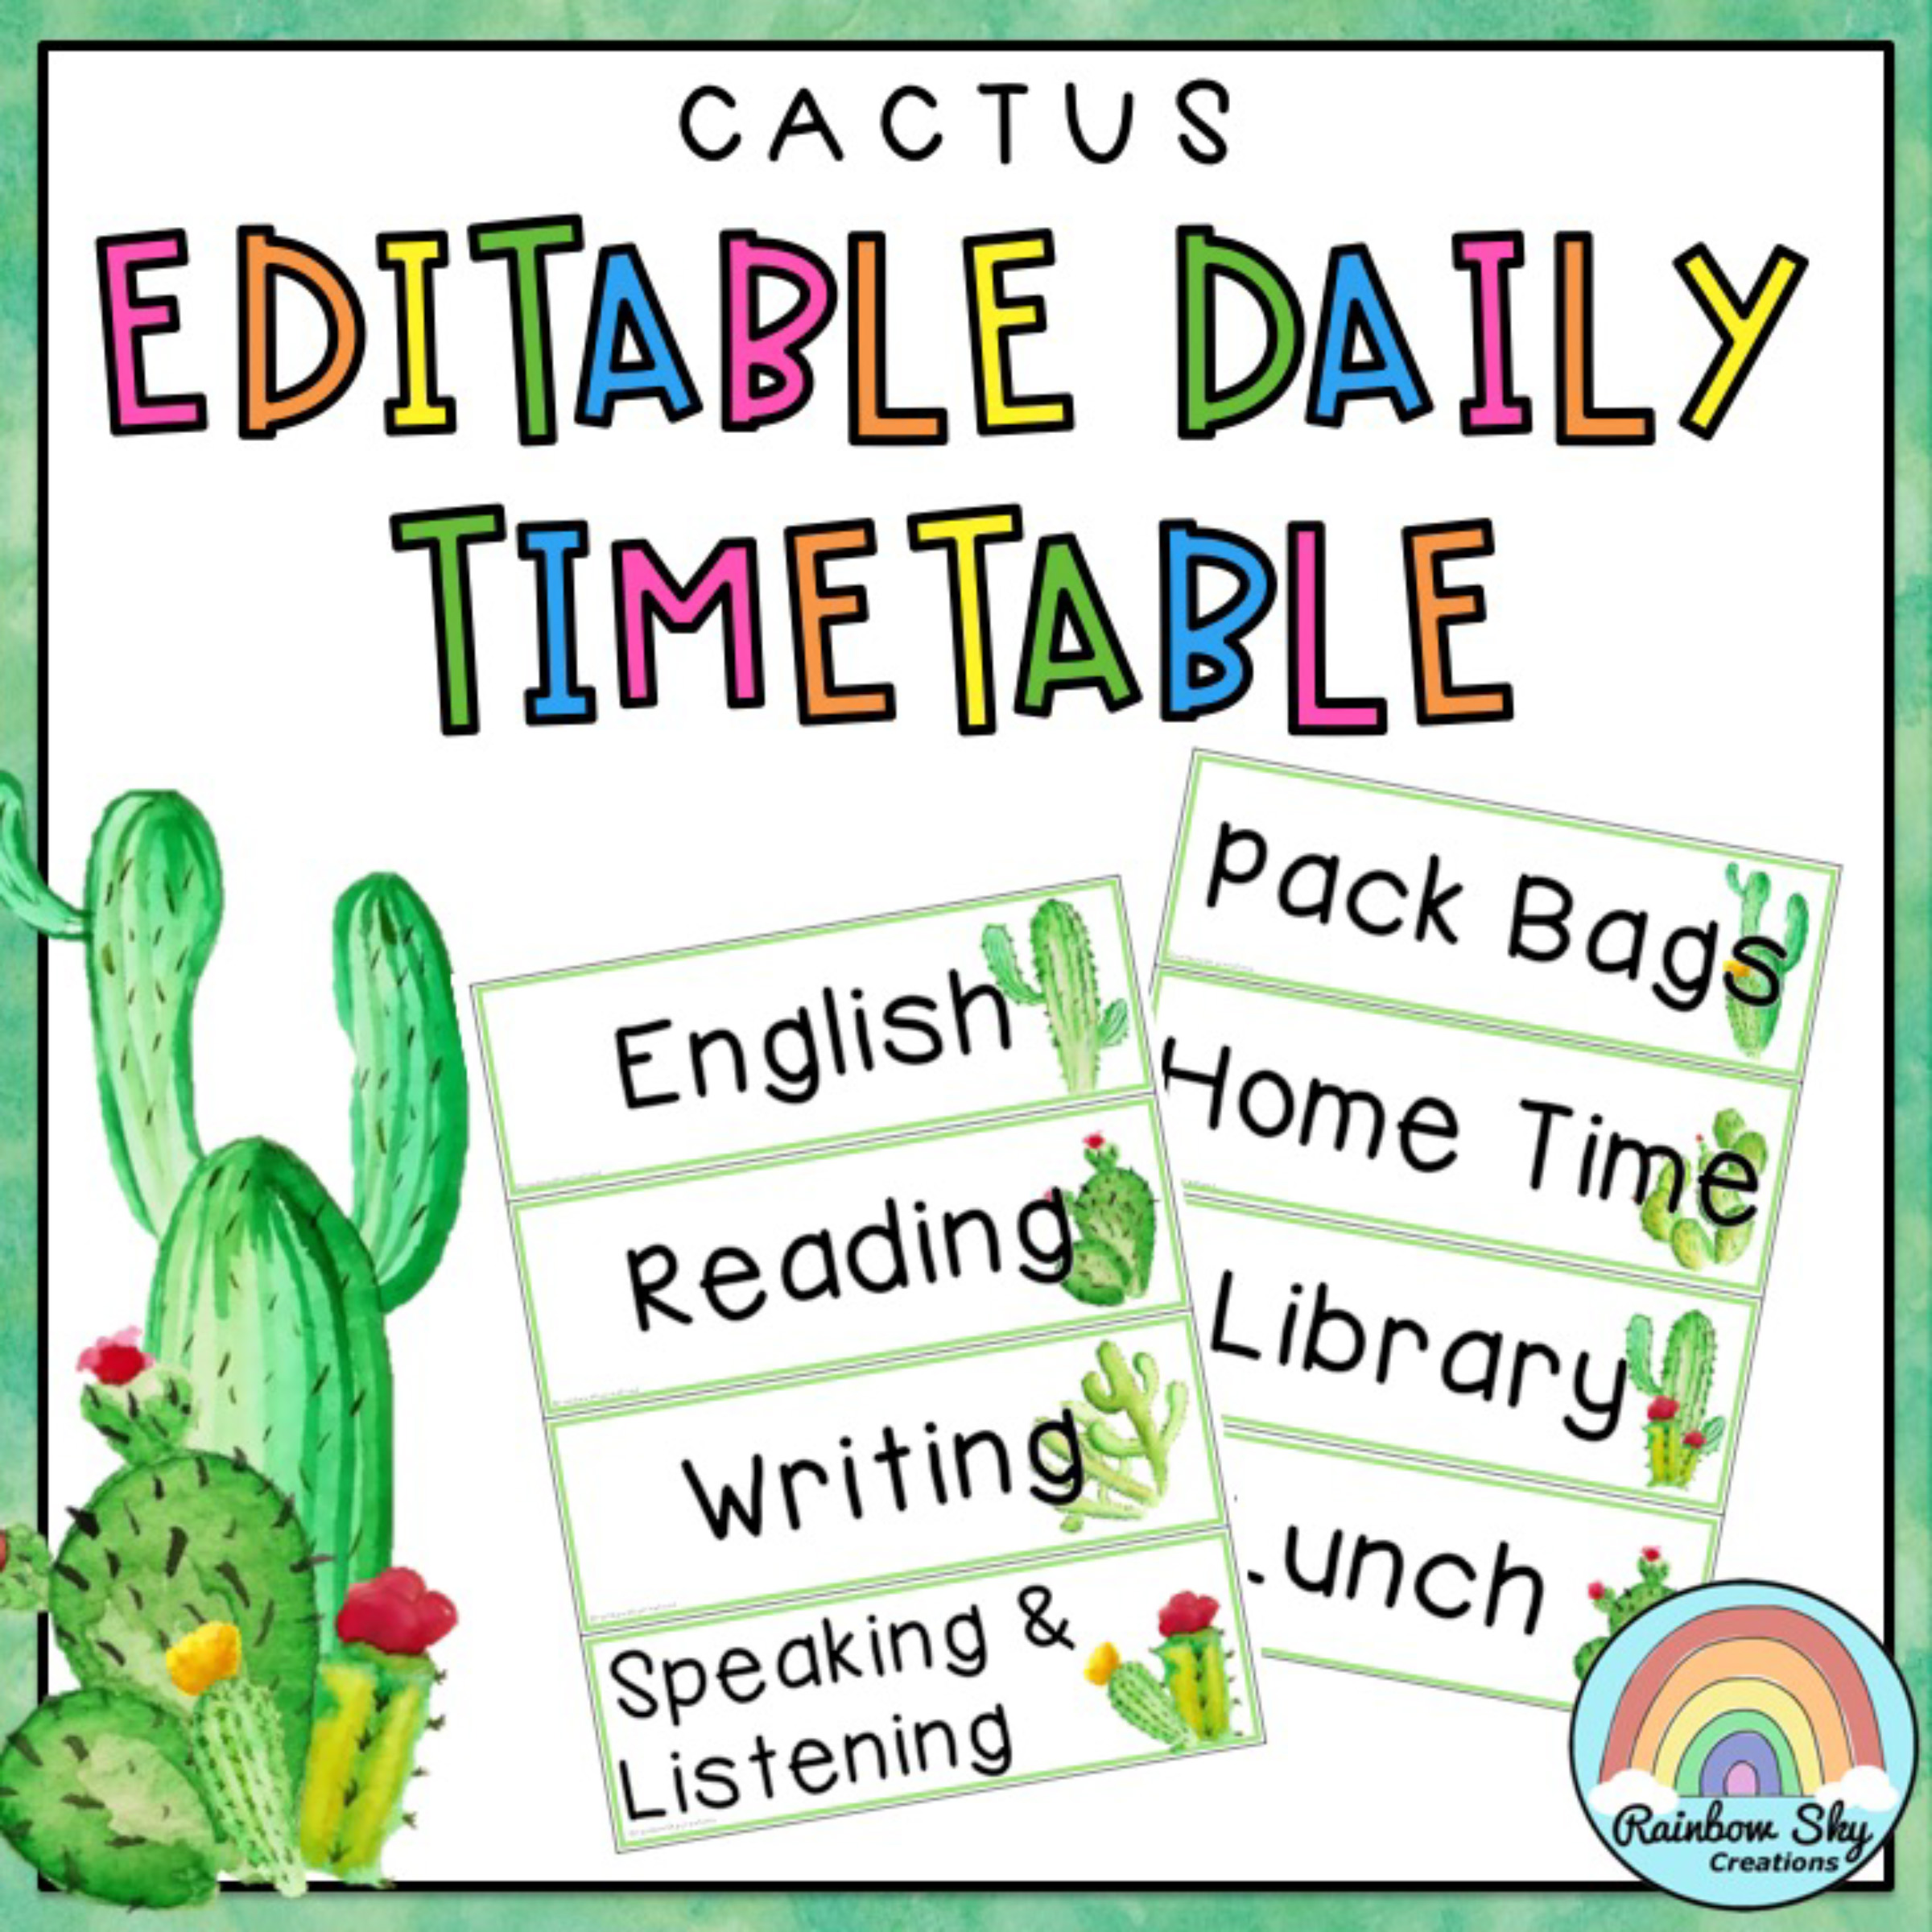 Cactus Daily Timetable